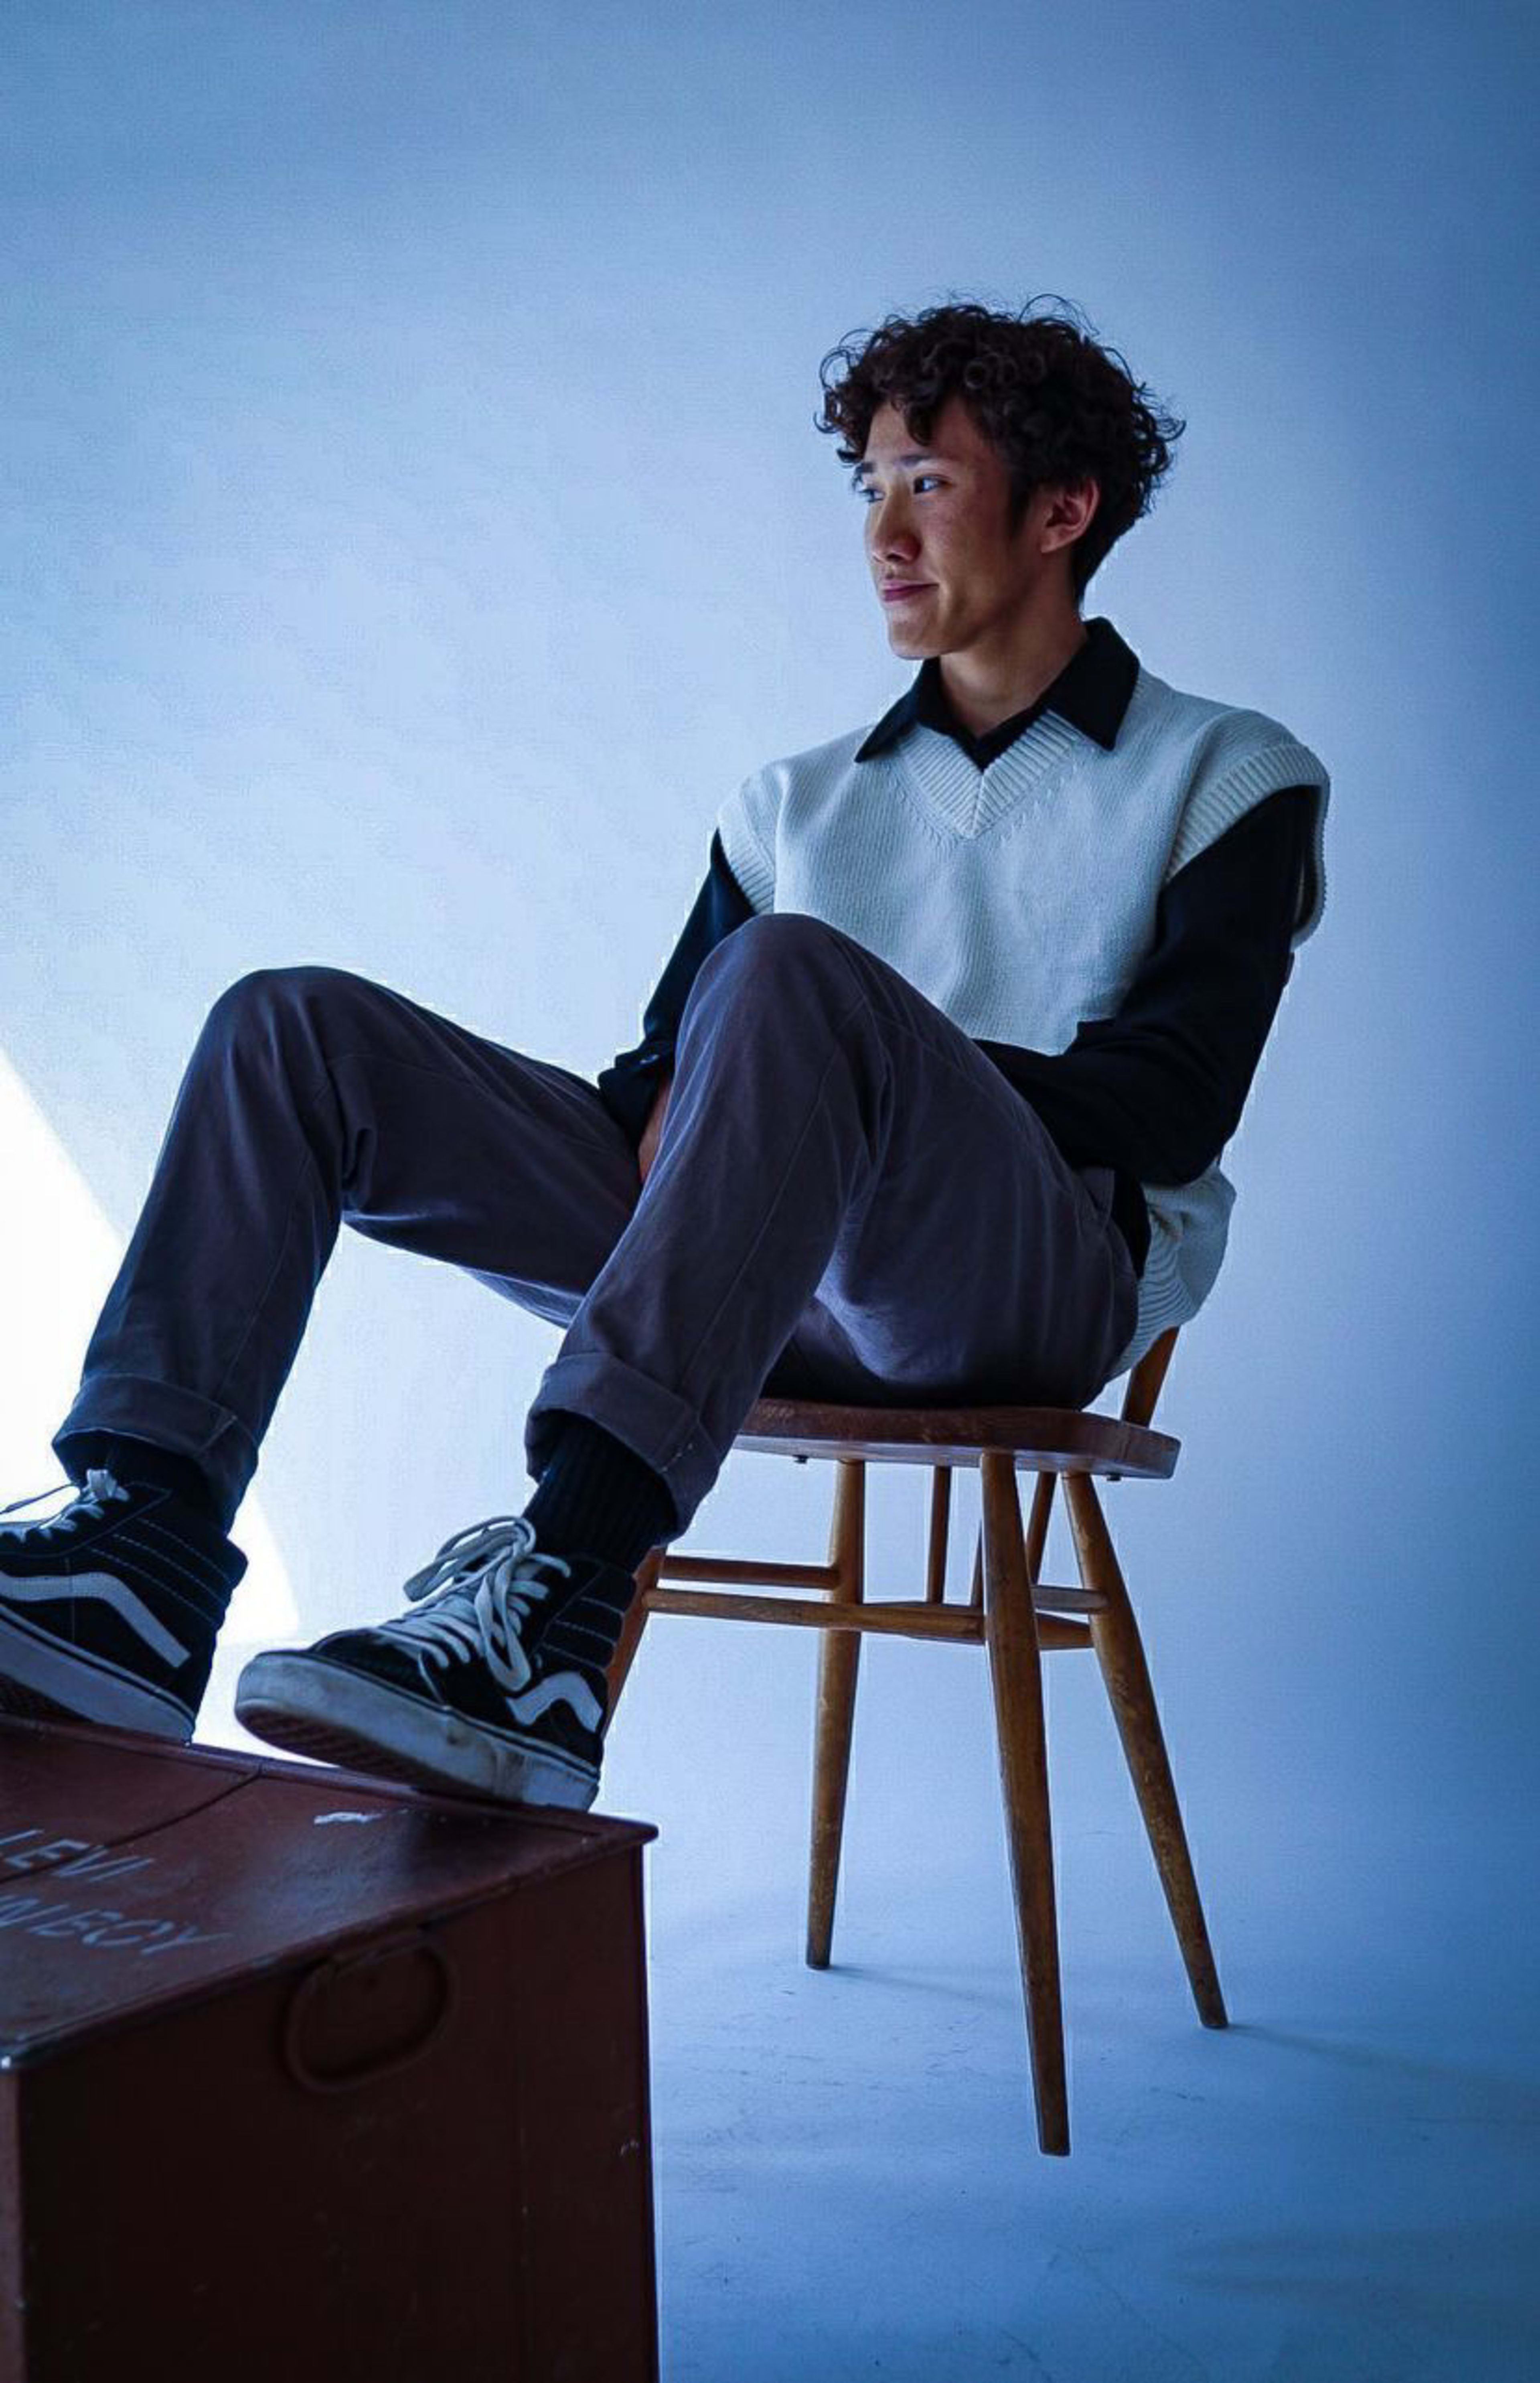 A man in blue sitting in a chair with his feet on a black suitcase during a photoshoot.